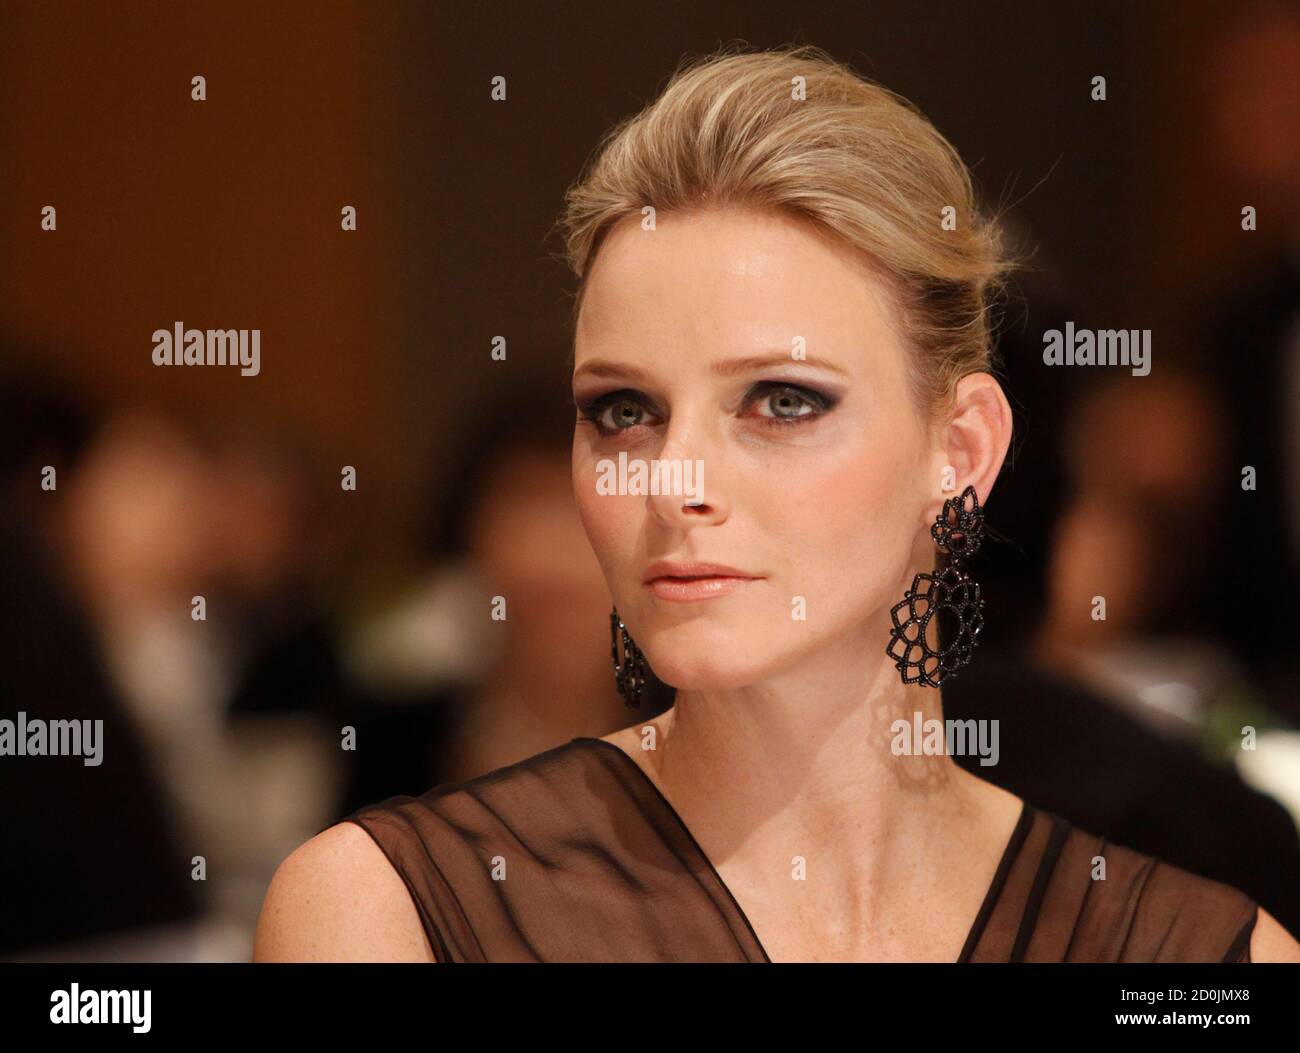 Prince Albert II of Monaco's fiancee Charlene Wittstock attends at a gala dinner hosted by BirdLife International in Tokyo October 29, 2010. REUTERS/Issei Kato (JAPAN - Tags: ENTERTAINMENT PROFILE) Stock Photo